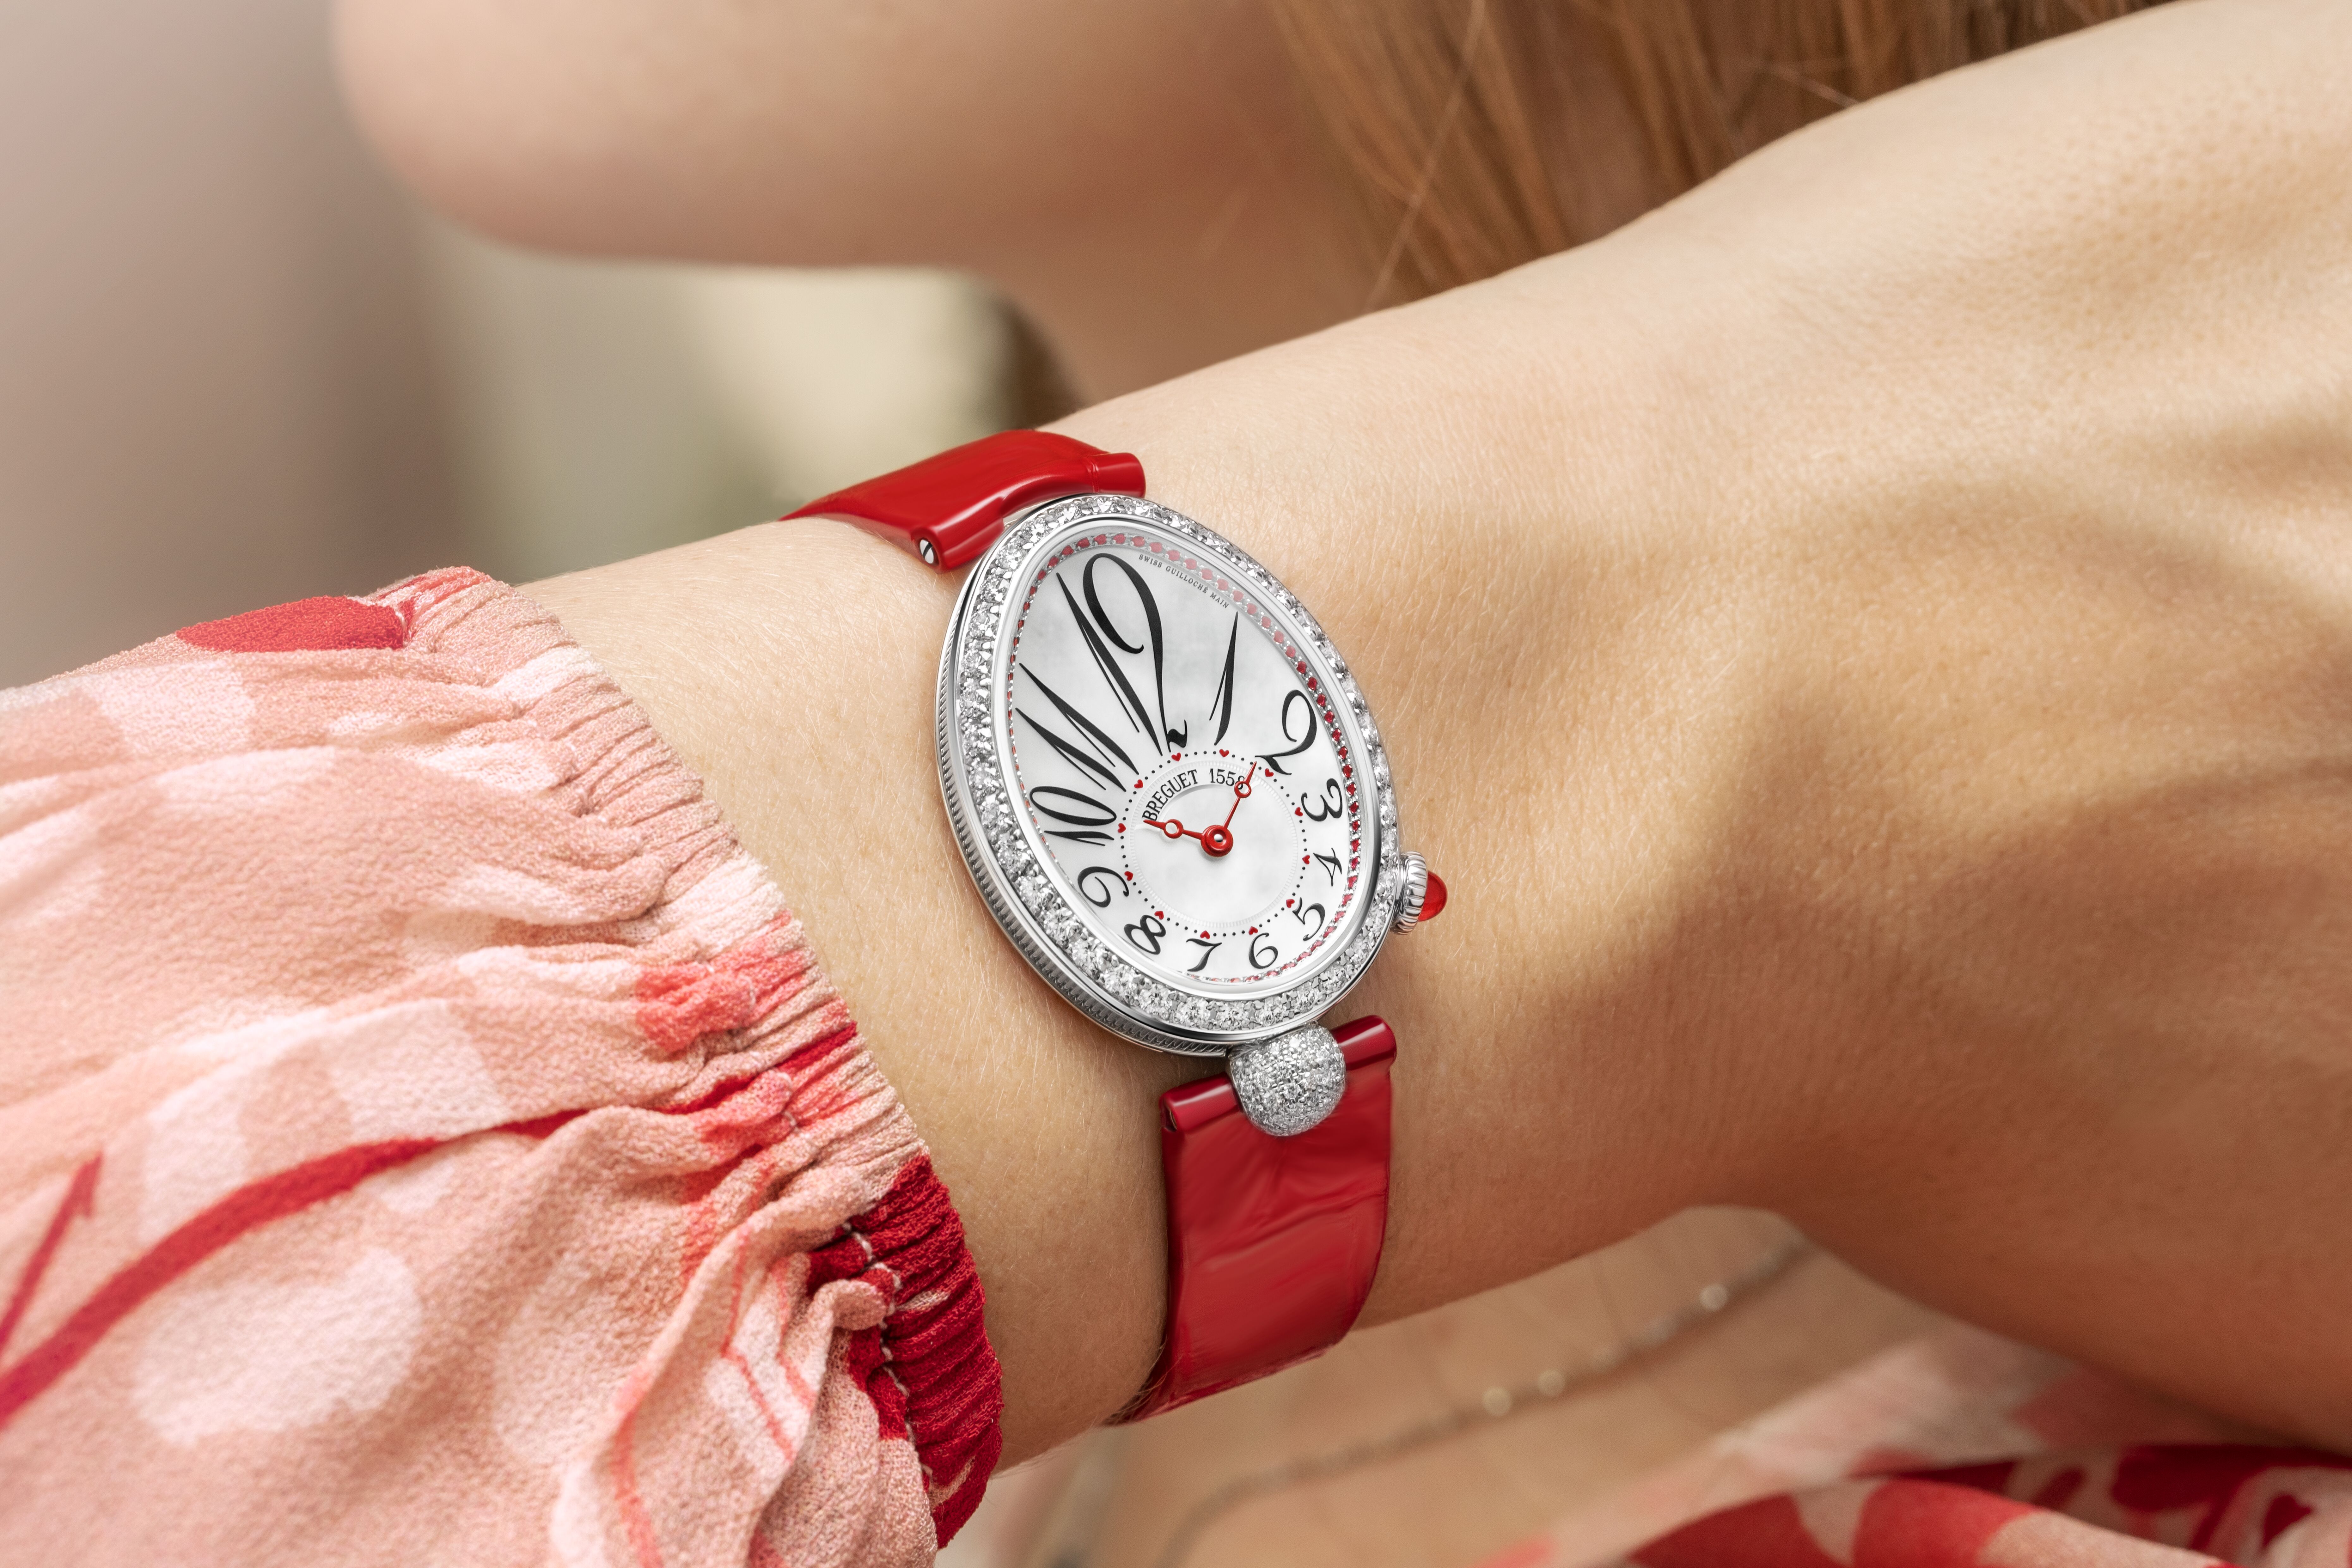 The red Reine de Naples strapped on the wrist